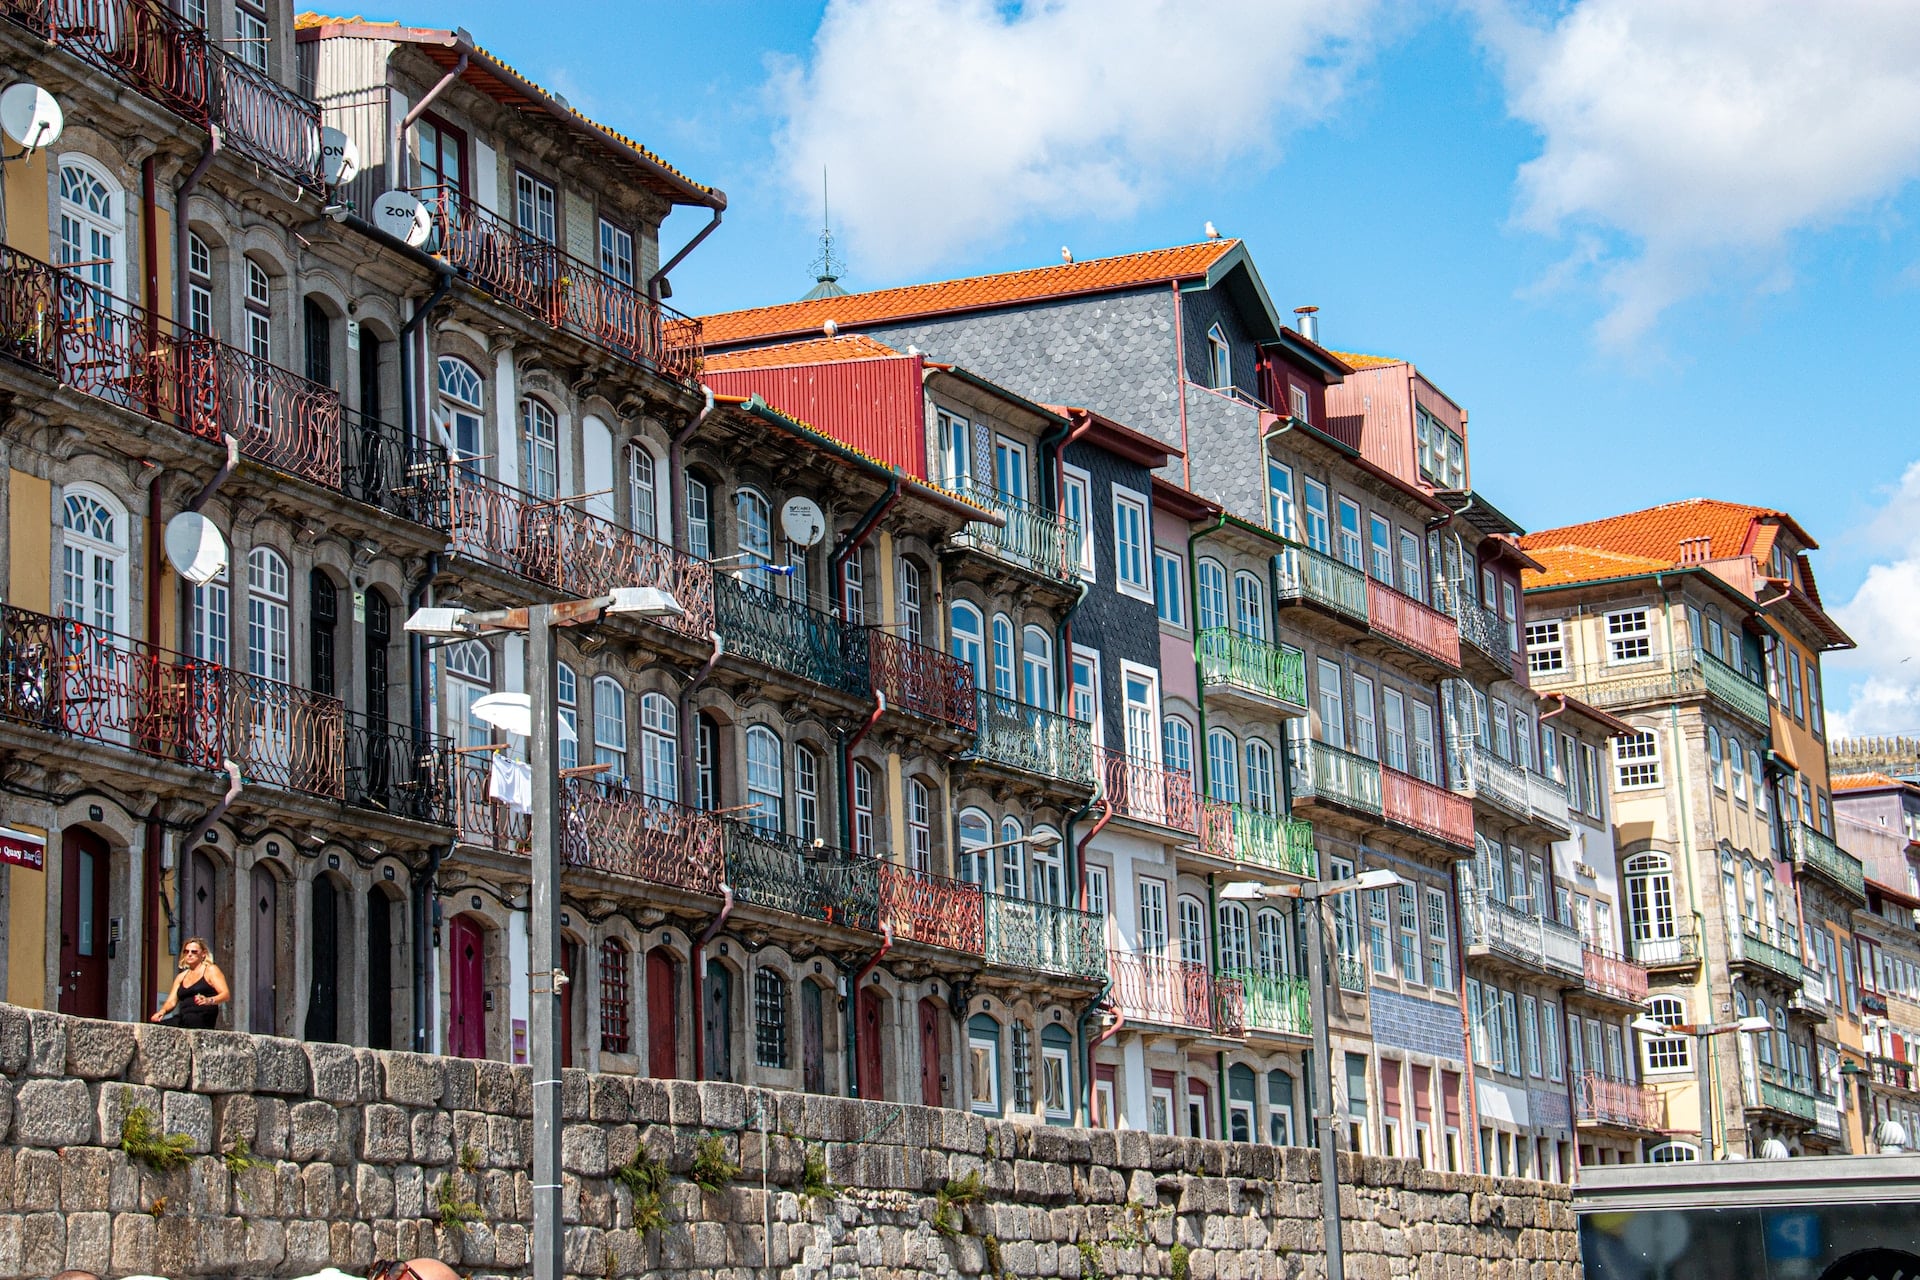 Ribeira is one of the most picturesque areas to stay in Porto, situated along the Douro River. This historic district is filled with narrow, cobblestone streets, colorful buildings, and lively squares.